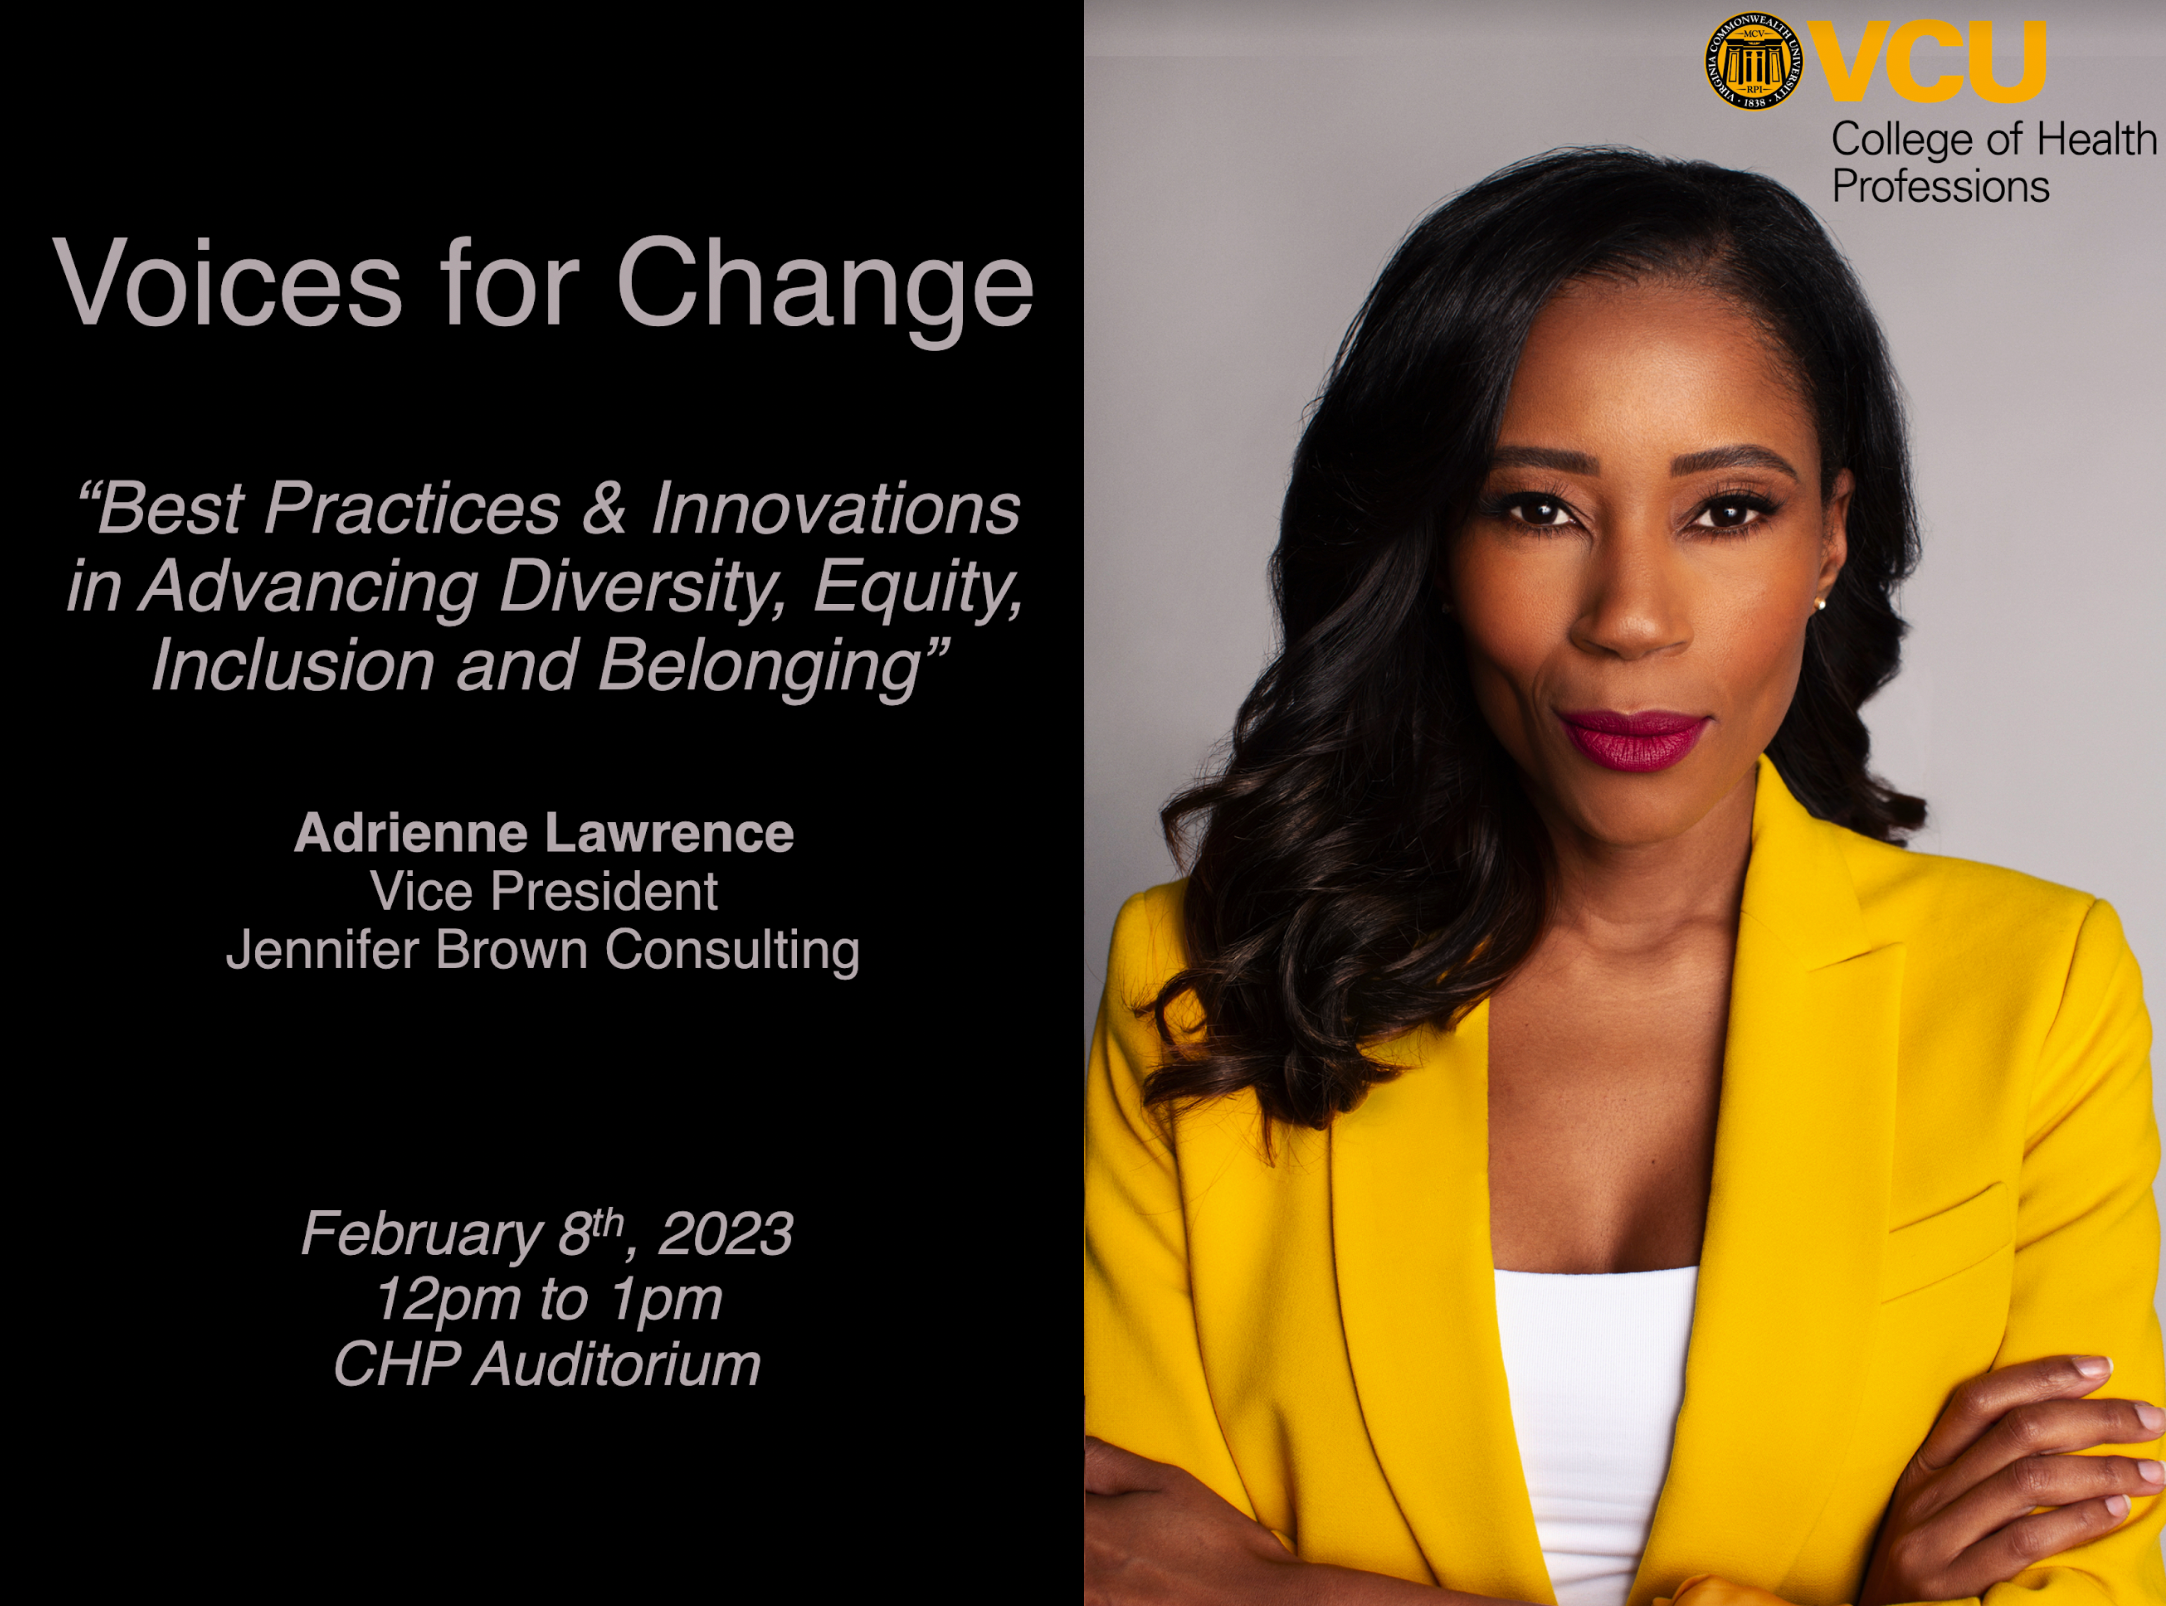 Voices for Change Best Practices & Innovations in Advancing Diversity, Equity, Inclusion and Belonging presented by Adrienne Lawrence Vice President of Jennifer Brown Consulting on Feb 8 2023 12-1pm CHP Auditorium